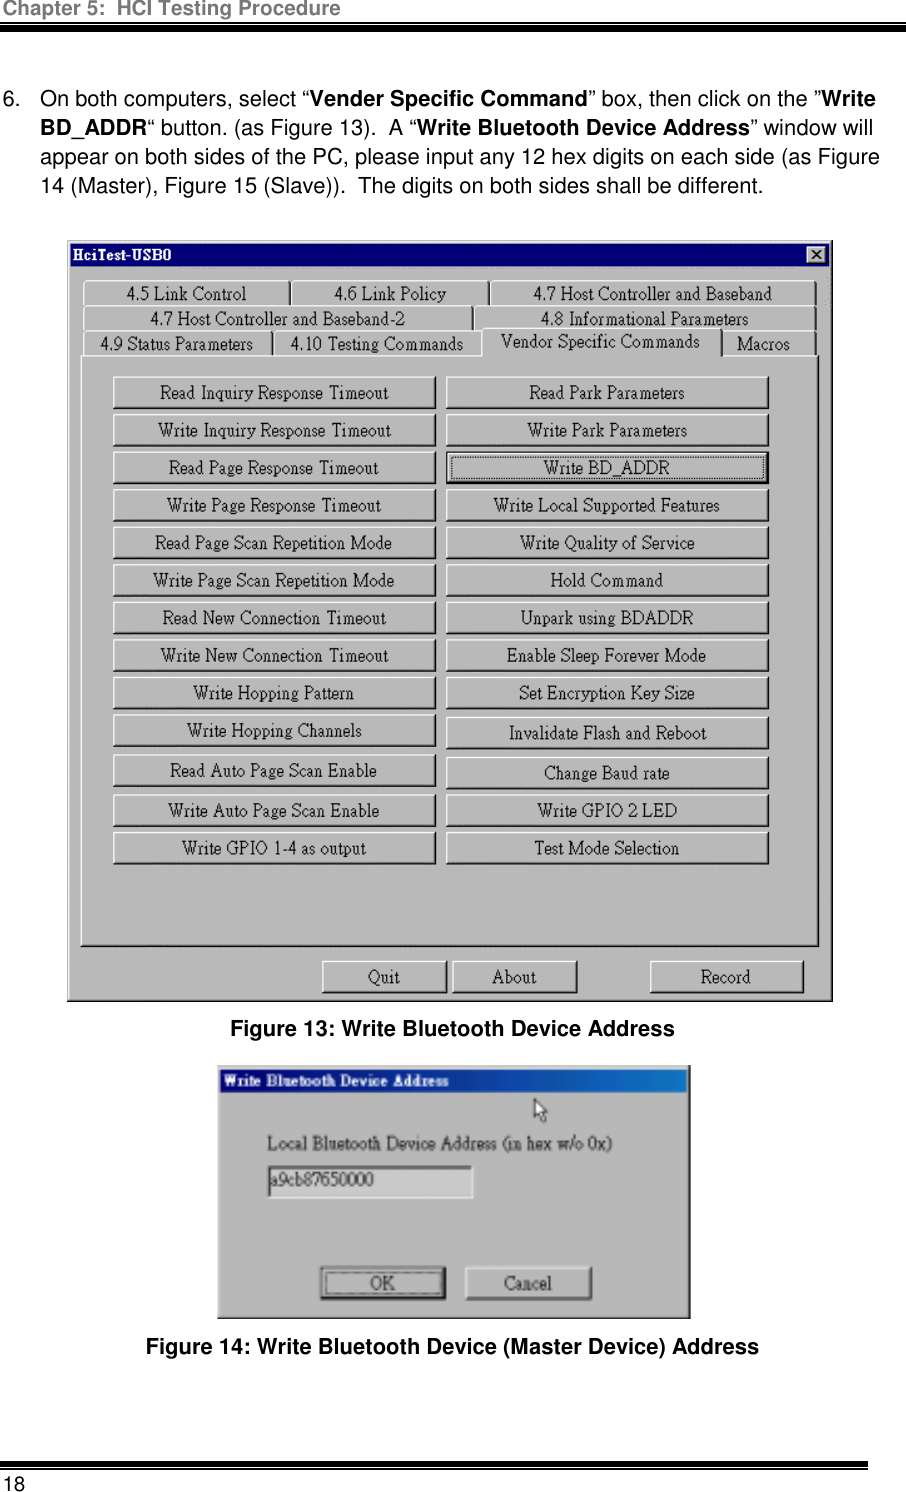 Chapter 5:  HCI Testing Procedure  18  6.  On both computers, select “Vender Specific Command” box, then click on the ”Write BD_ADDR“ button. (as Figure 13).  A “Write Bluetooth Device Address” window will appear on both sides of the PC, please input any 12 hex digits on each side (as Figure 14 (Master), Figure 15 (Slave)).  The digits on both sides shall be different. Figure 13: Write Bluetooth Device Address  Figure 14: Write Bluetooth Device (Master Device) Address   